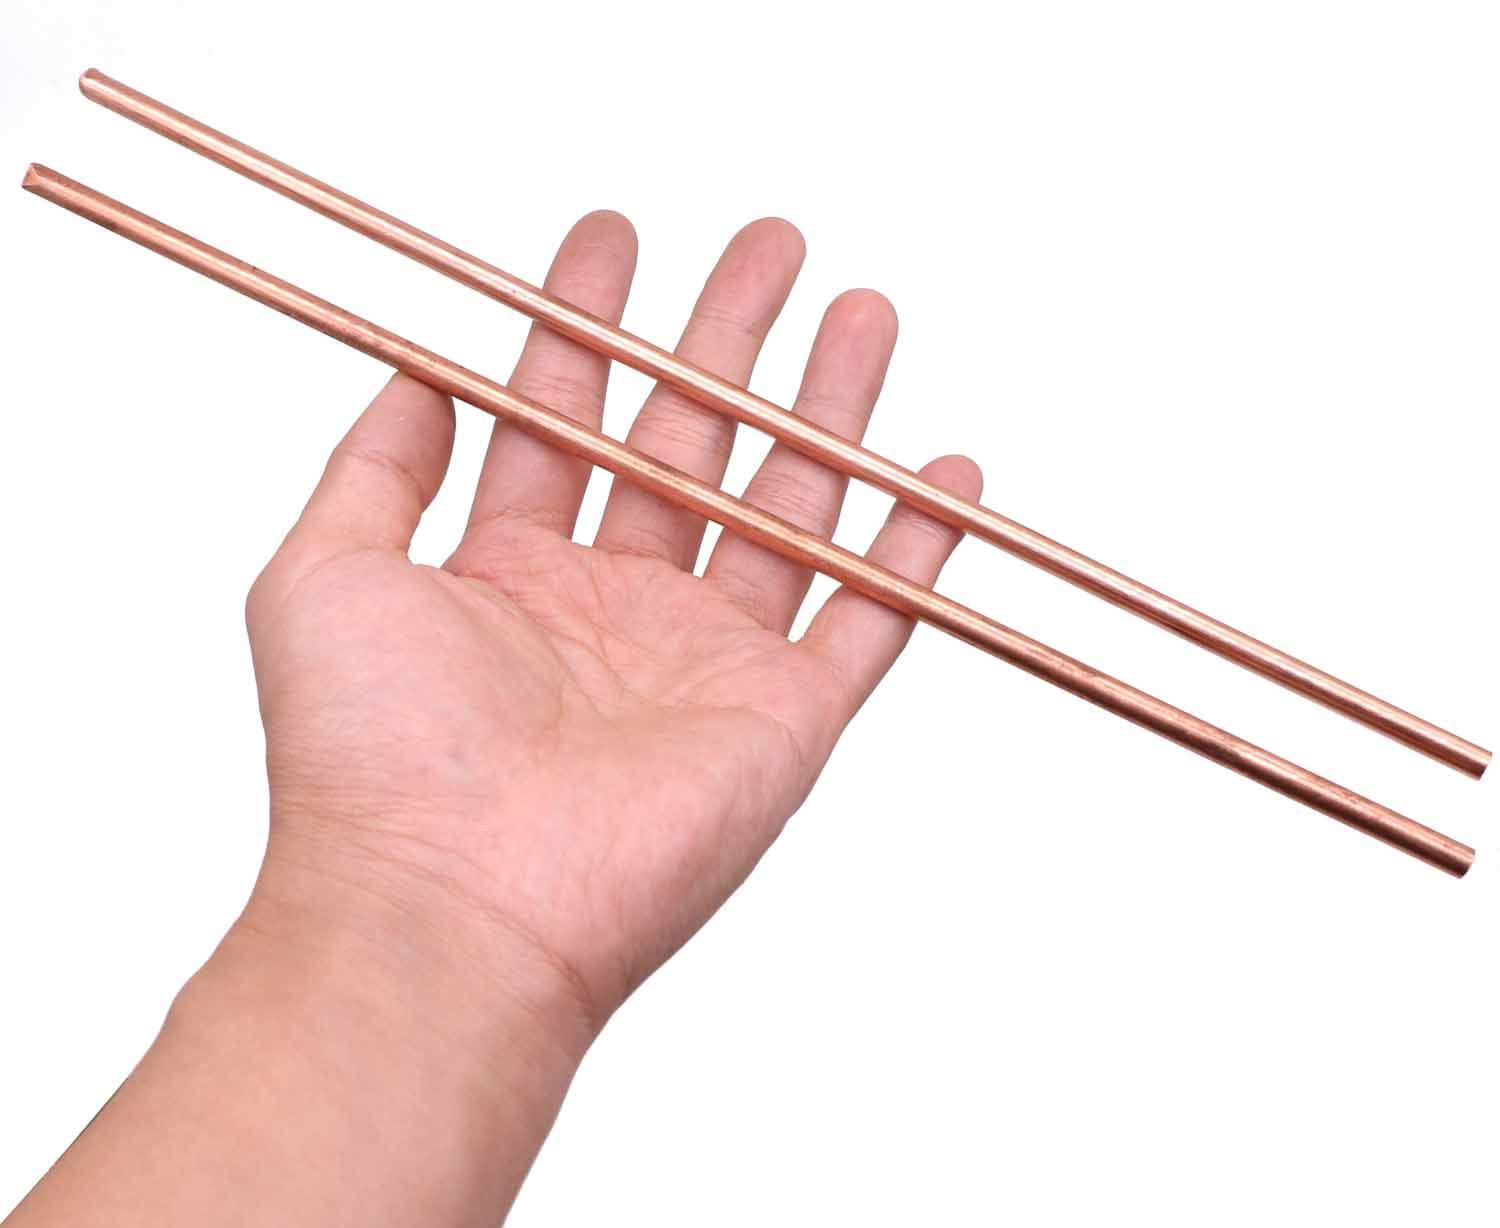 6Mm Copper round Rod, VERNUOS 2PCS Copper round Rods Lathe Bar Stock, 6Mm in Diameter 300Mm(11.8In) in Length